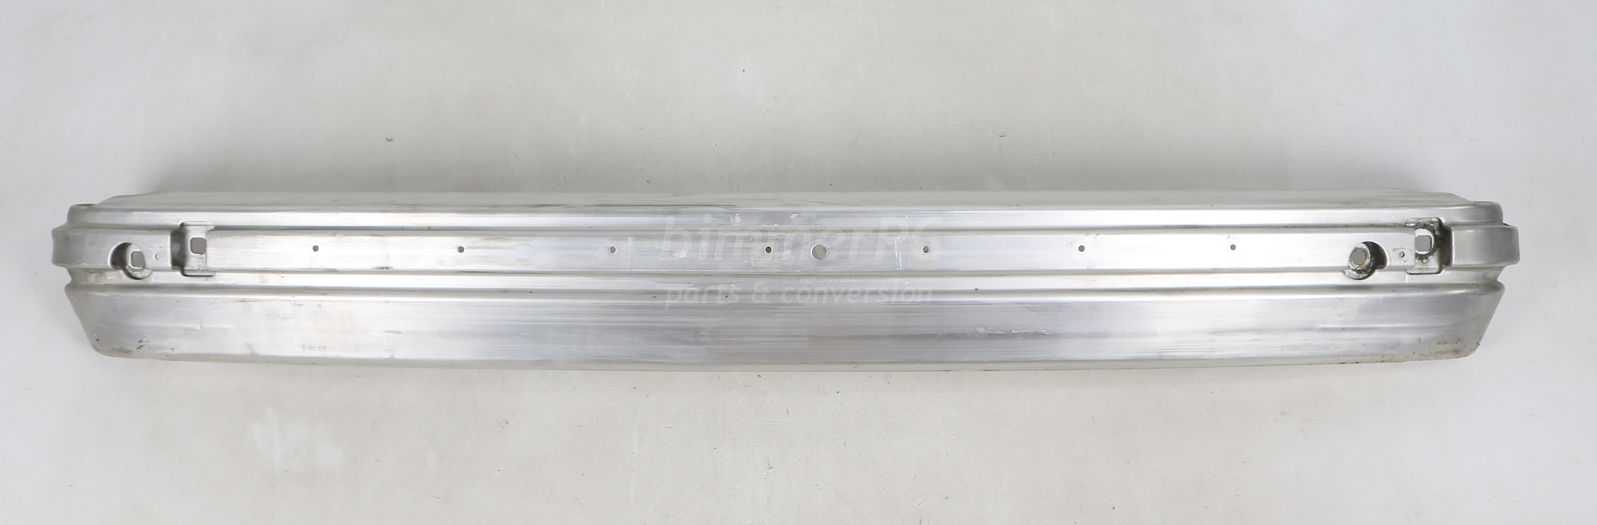 Picture of BMW 51121944183 Rear Bumper Rebar Alloy Core Carrier Reinforcement Support Member E34 for sale